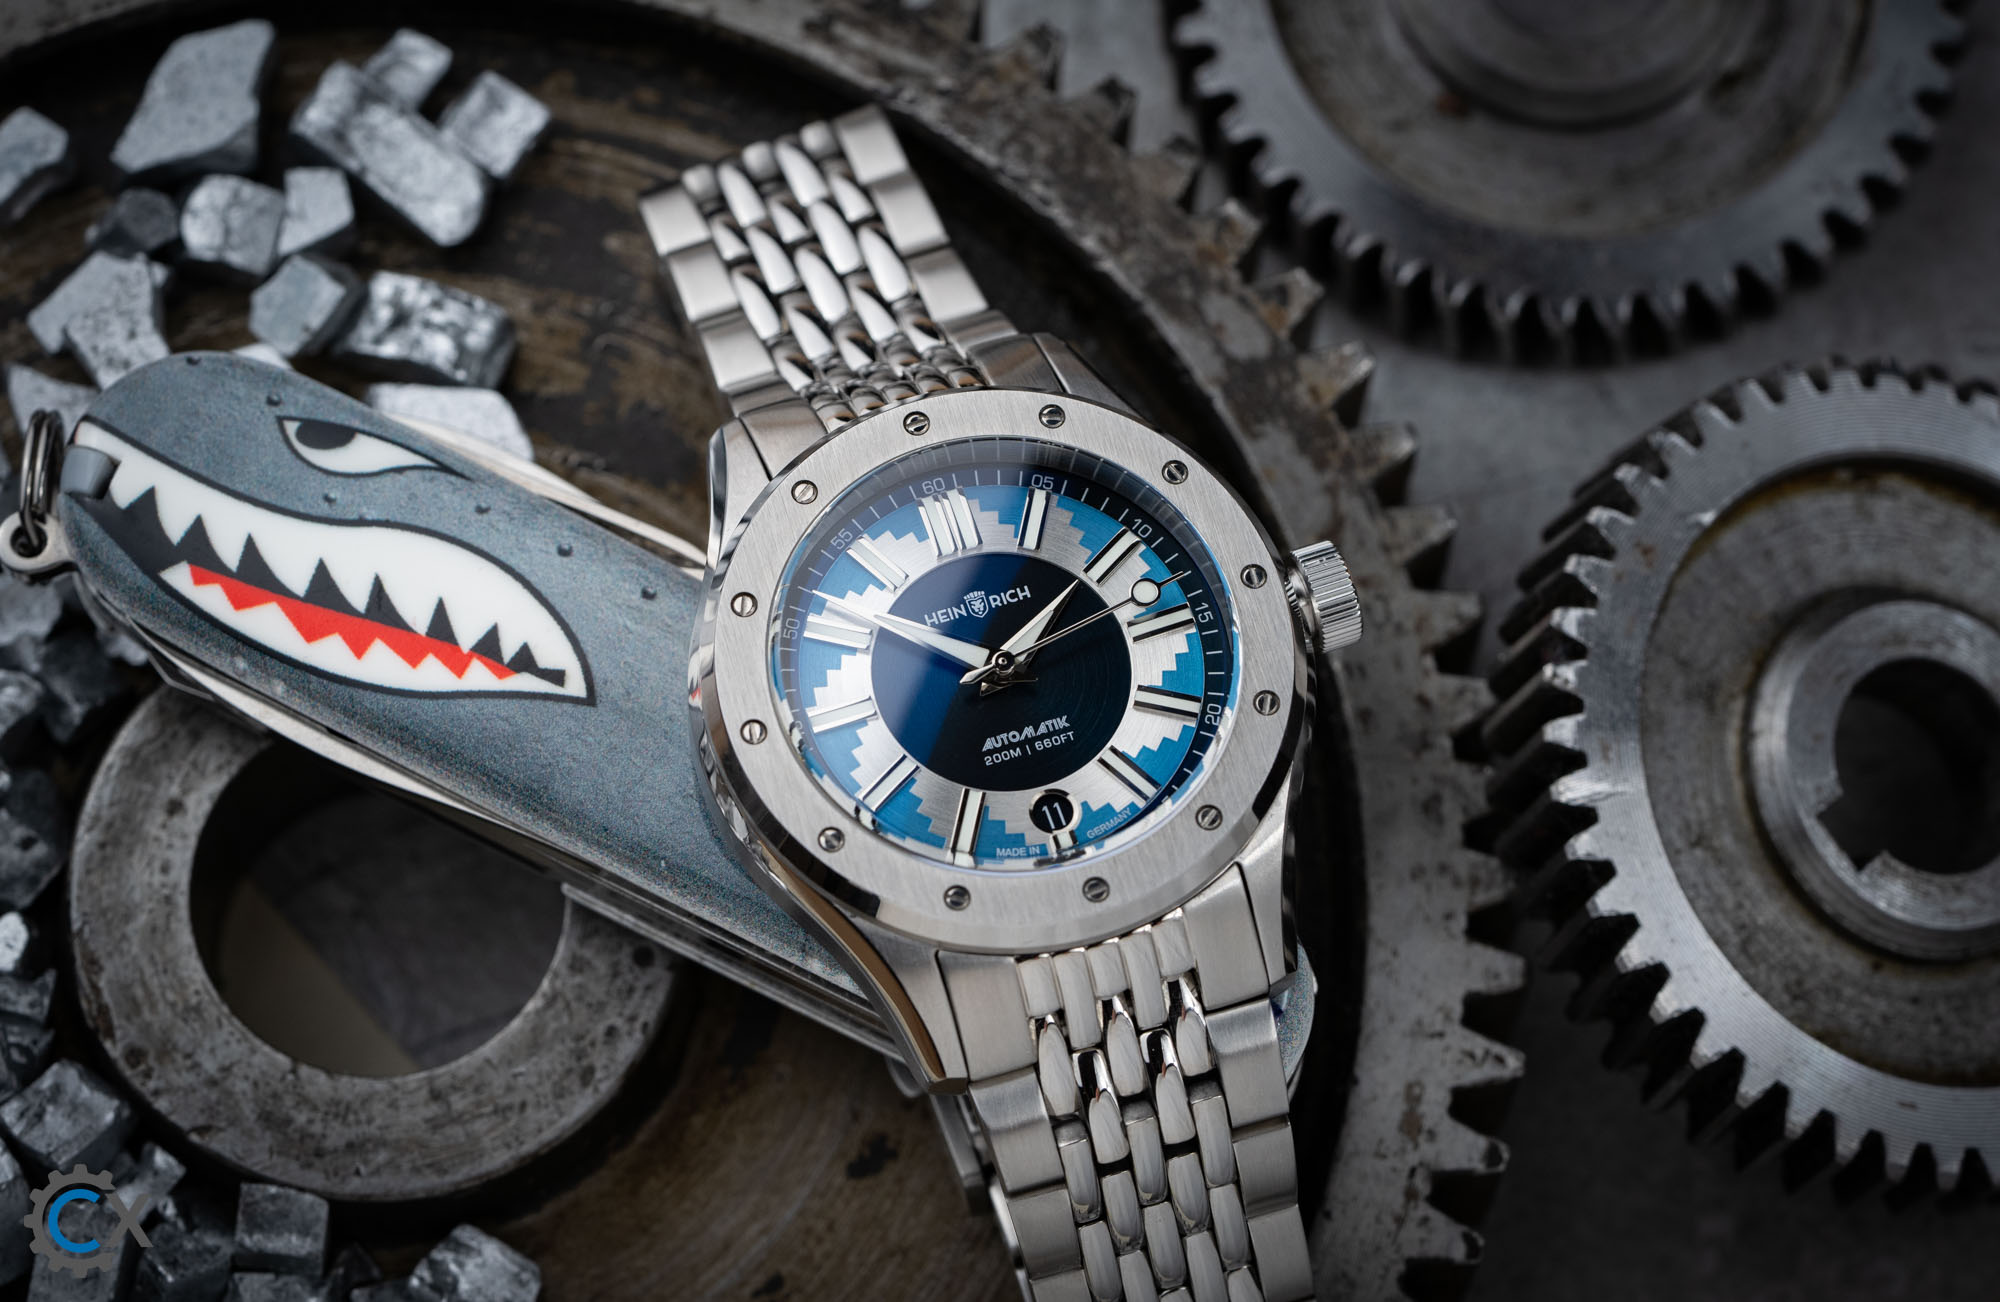 Heinrich Watch Helicoprion Buzzsaw Dial Test 2023 01362